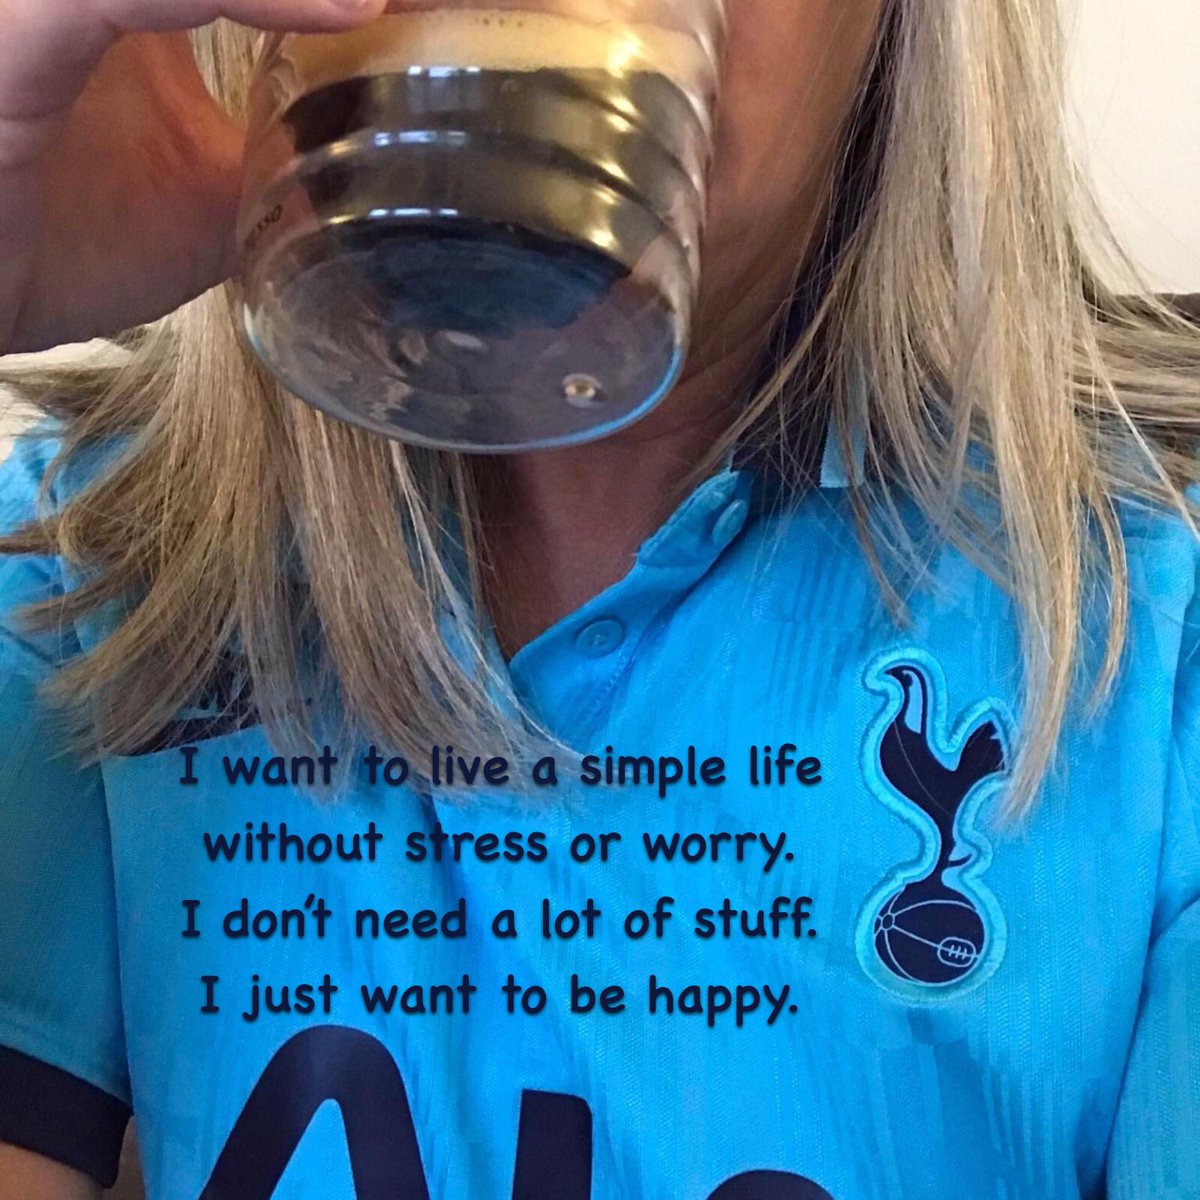 … and lots of Spurs shirts… #thursdayvibes https://t.co/cRyJON0PTx